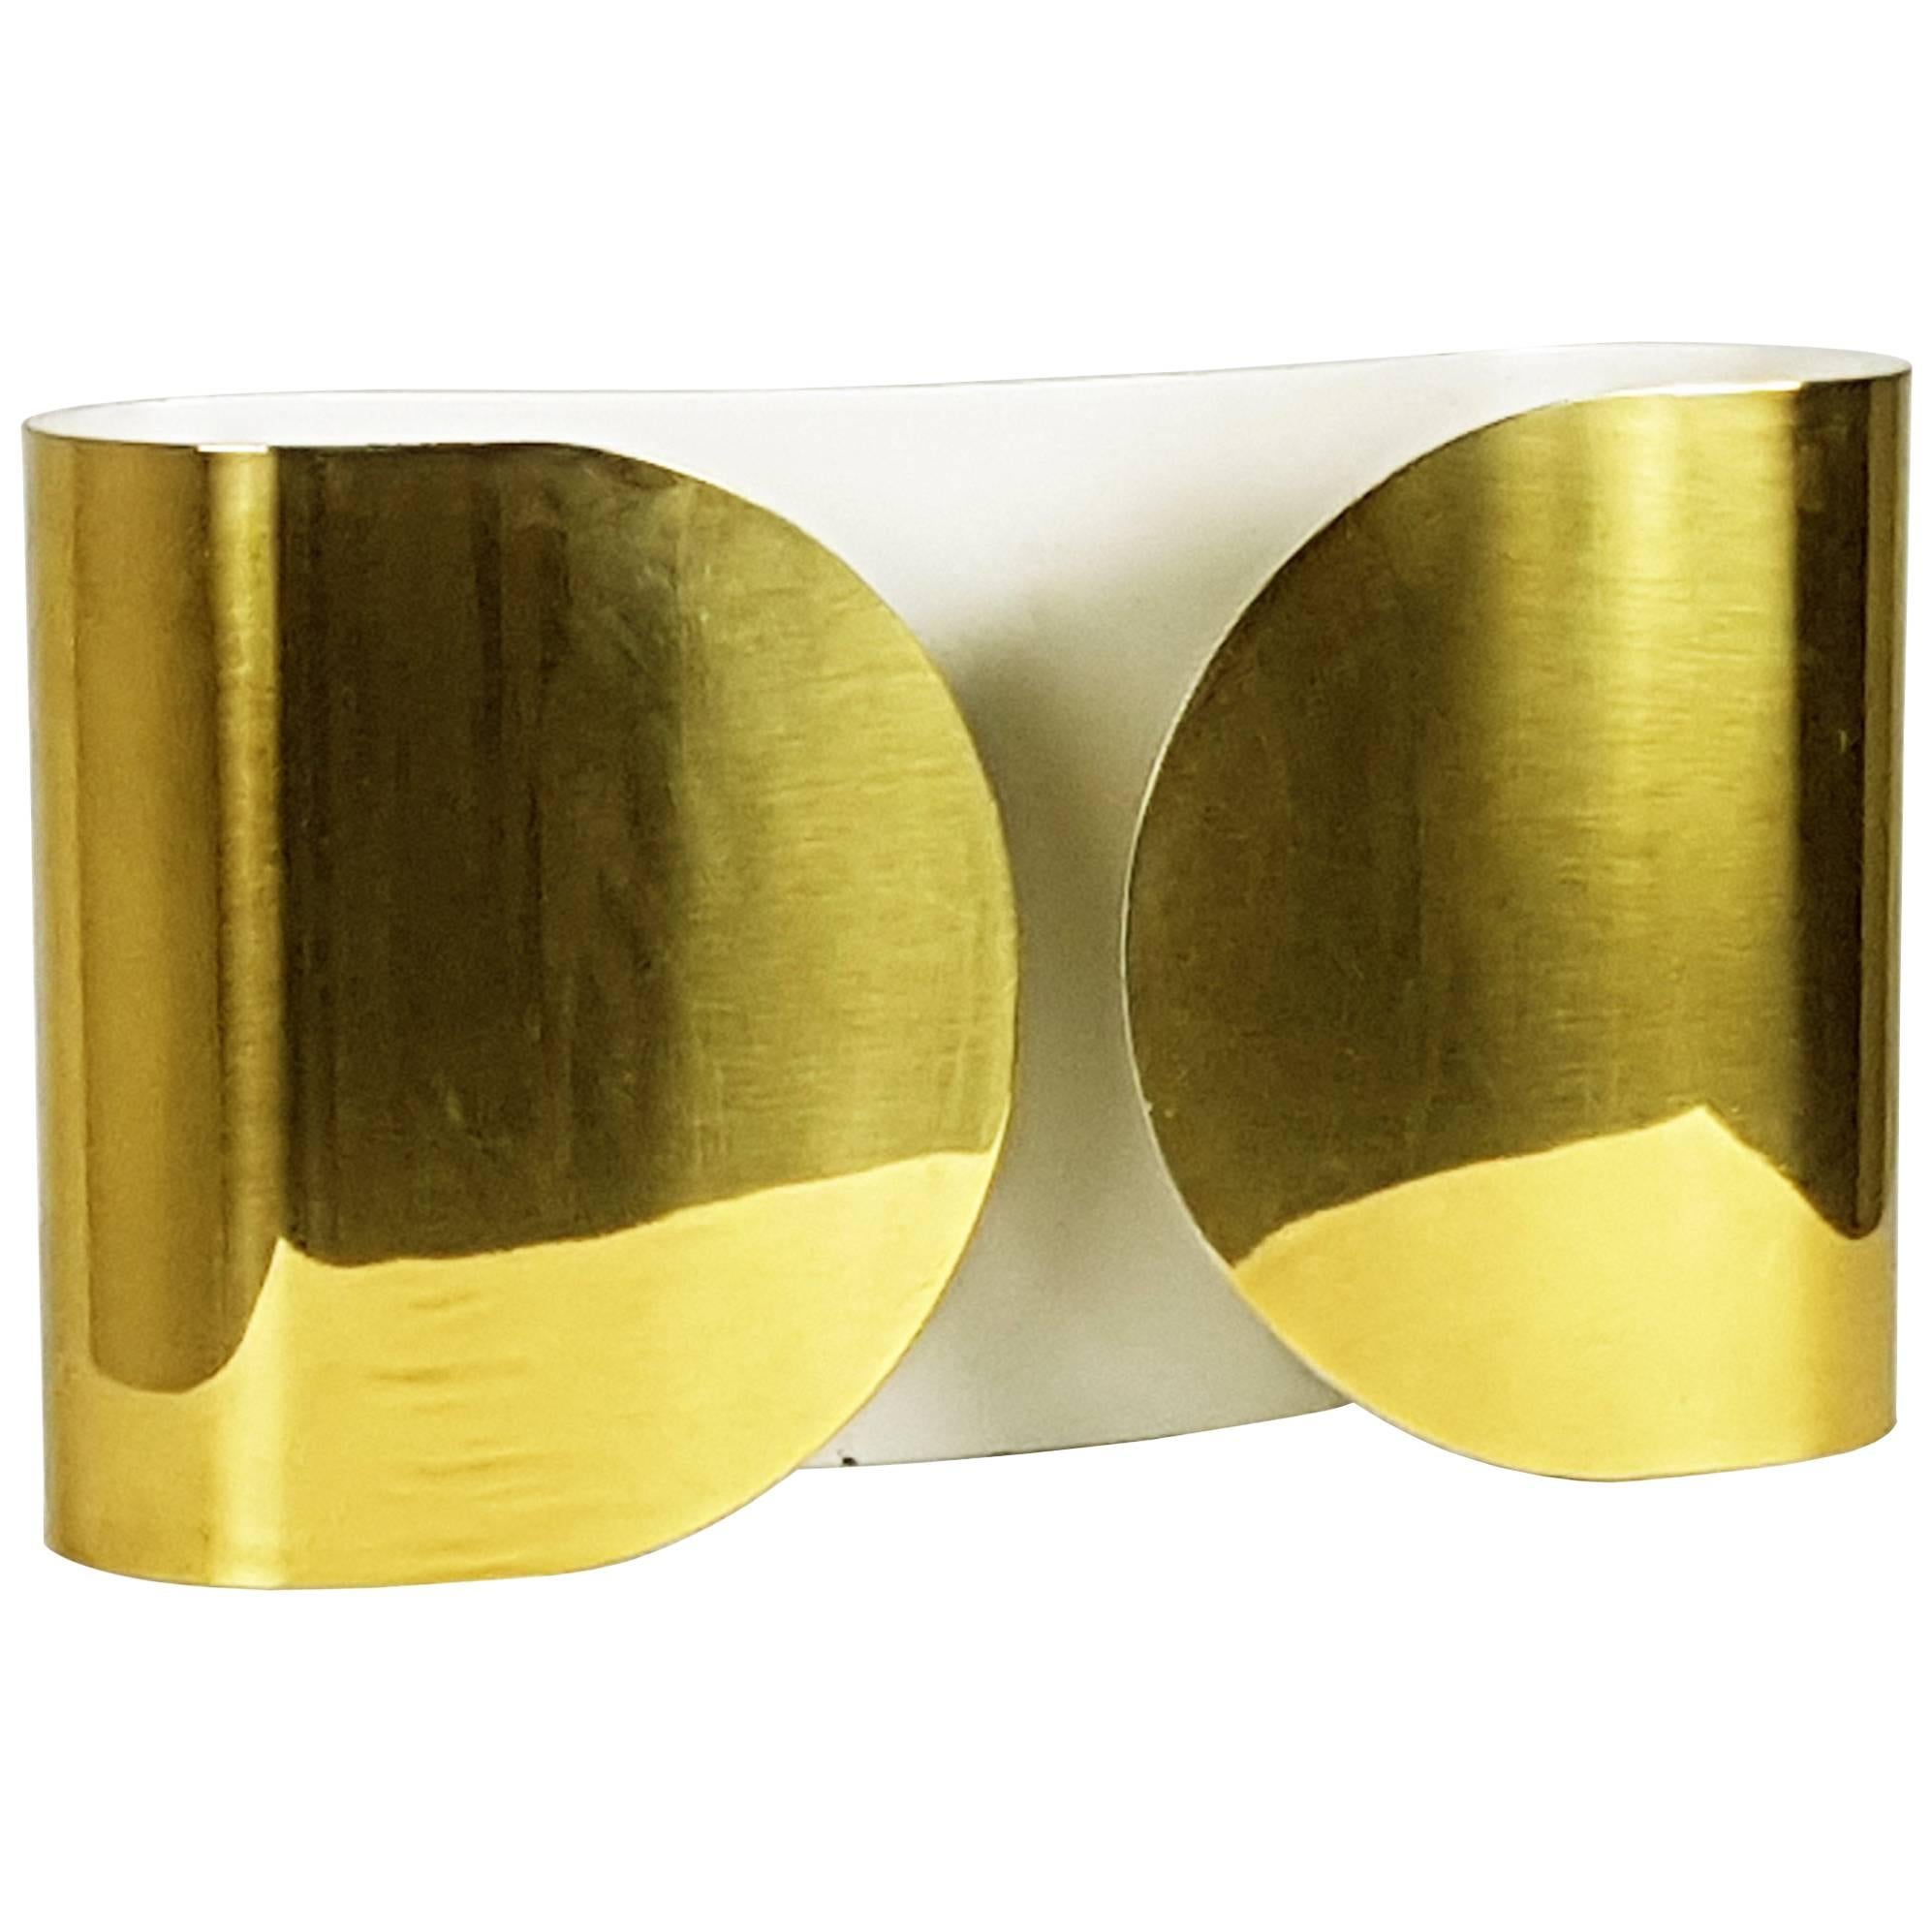 Early & Rare "Polished Brass Finish" Version Foglio Sconce by T. Scarpa for Flos